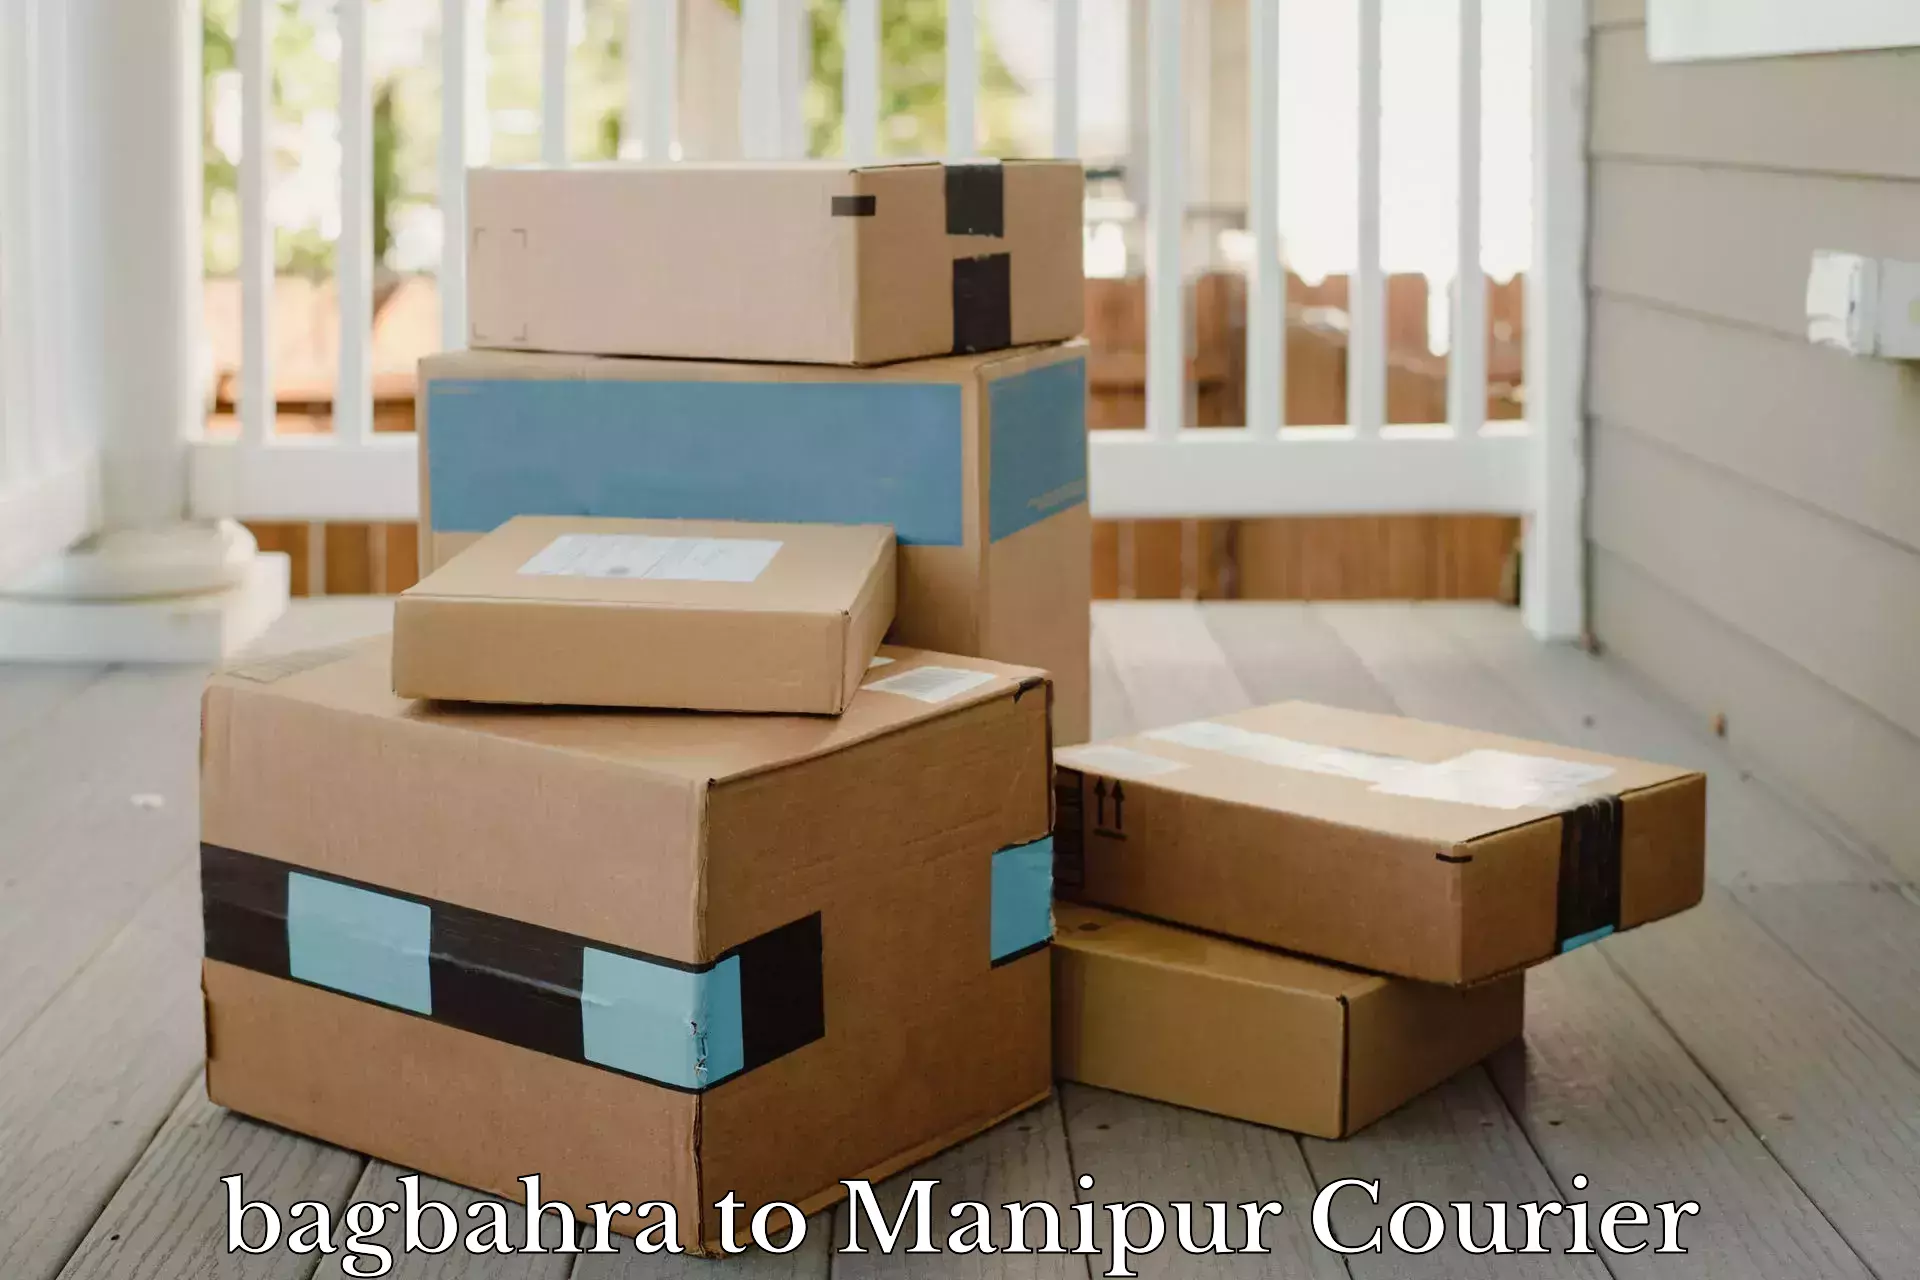 User-friendly delivery service bagbahra to Imphal